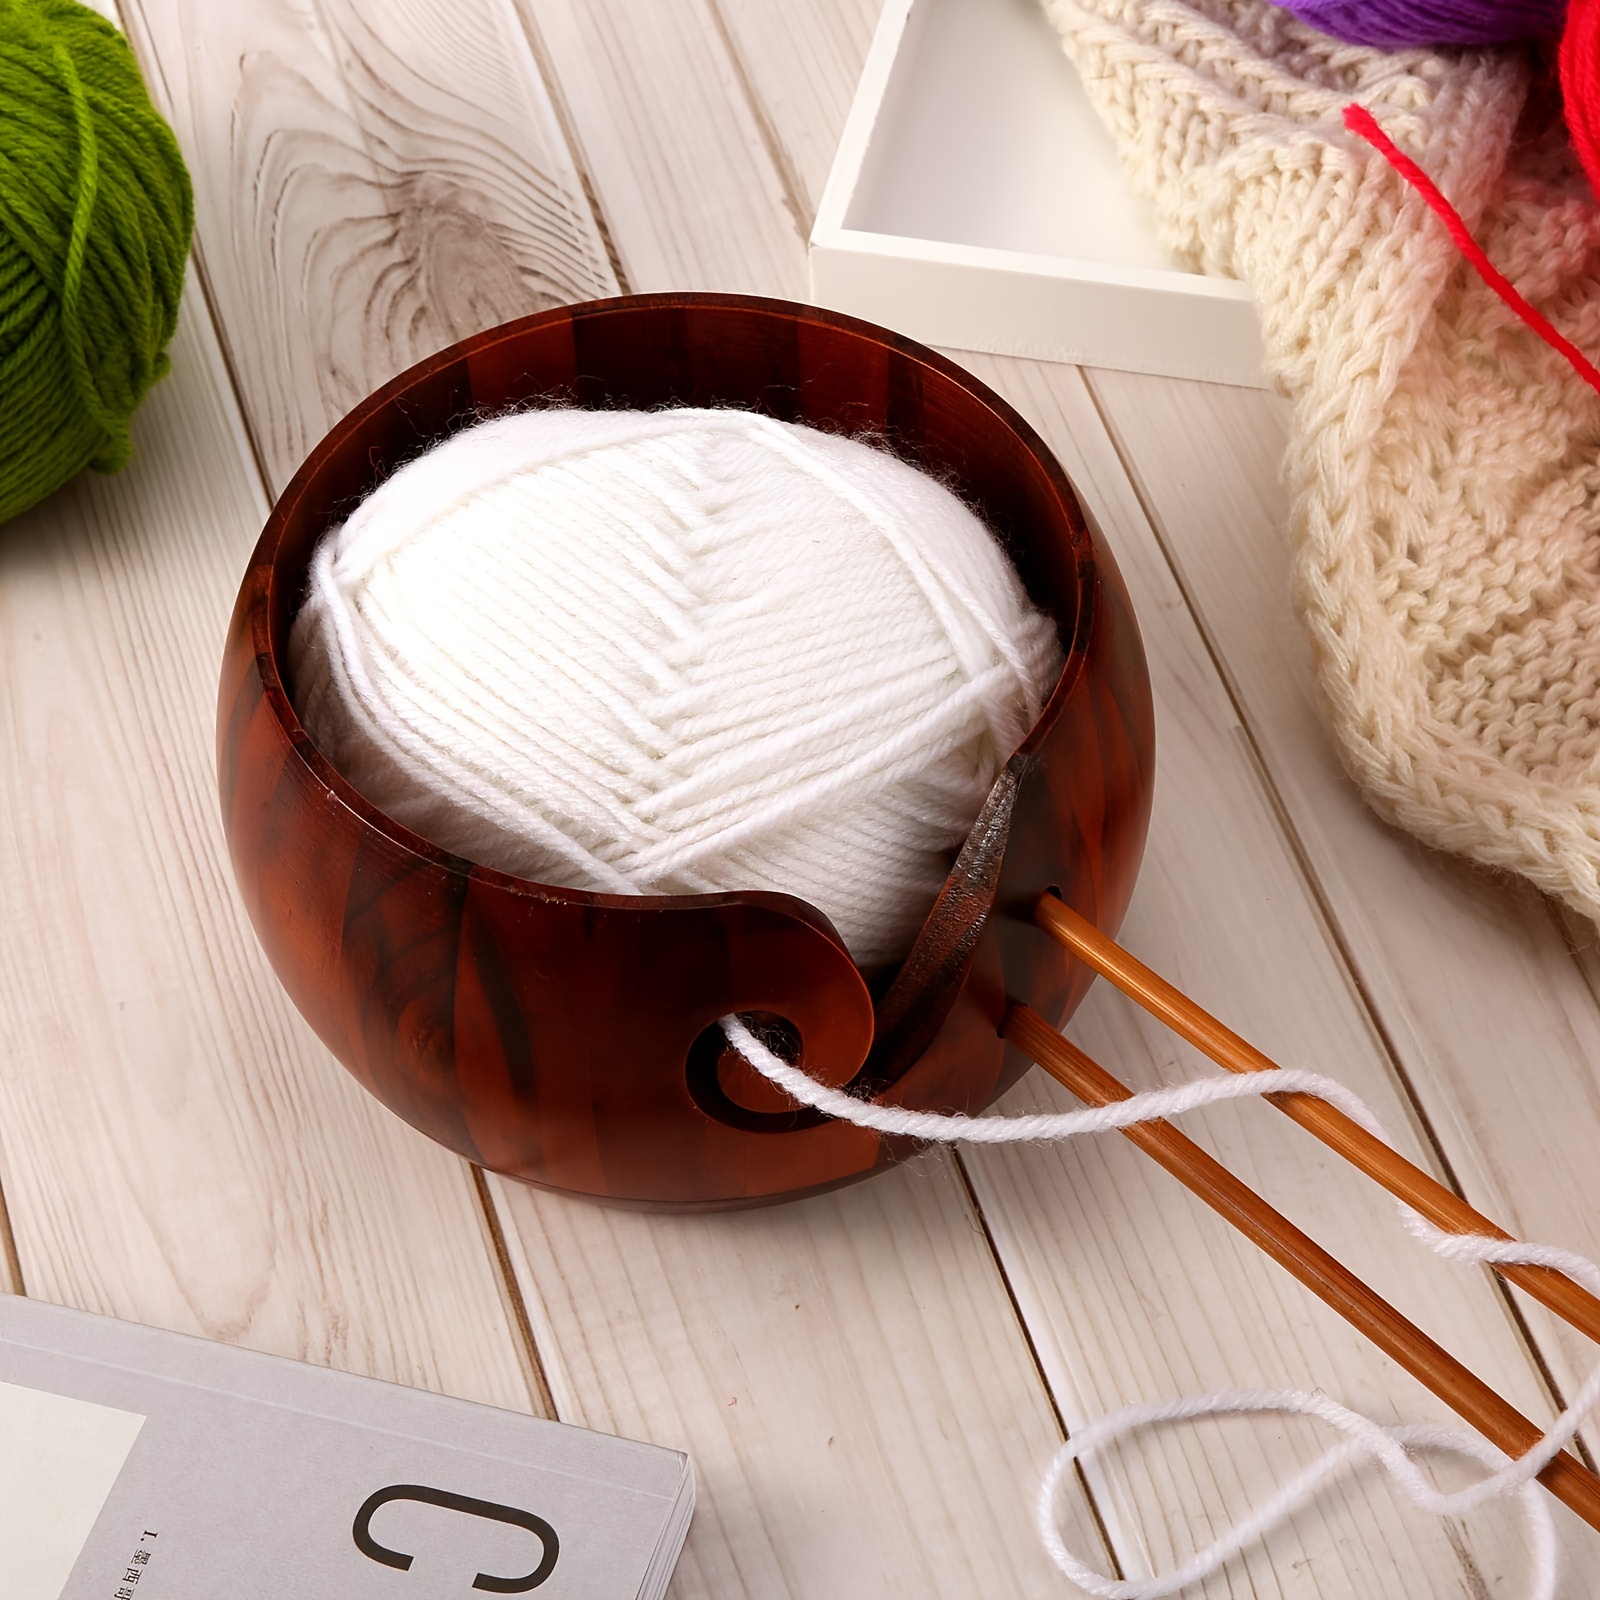 IUAQDP Wooden Yarn Bowls for Crochet Knitting Wool Storage Basket Round with Holes Handmade Craft Crochet Kit